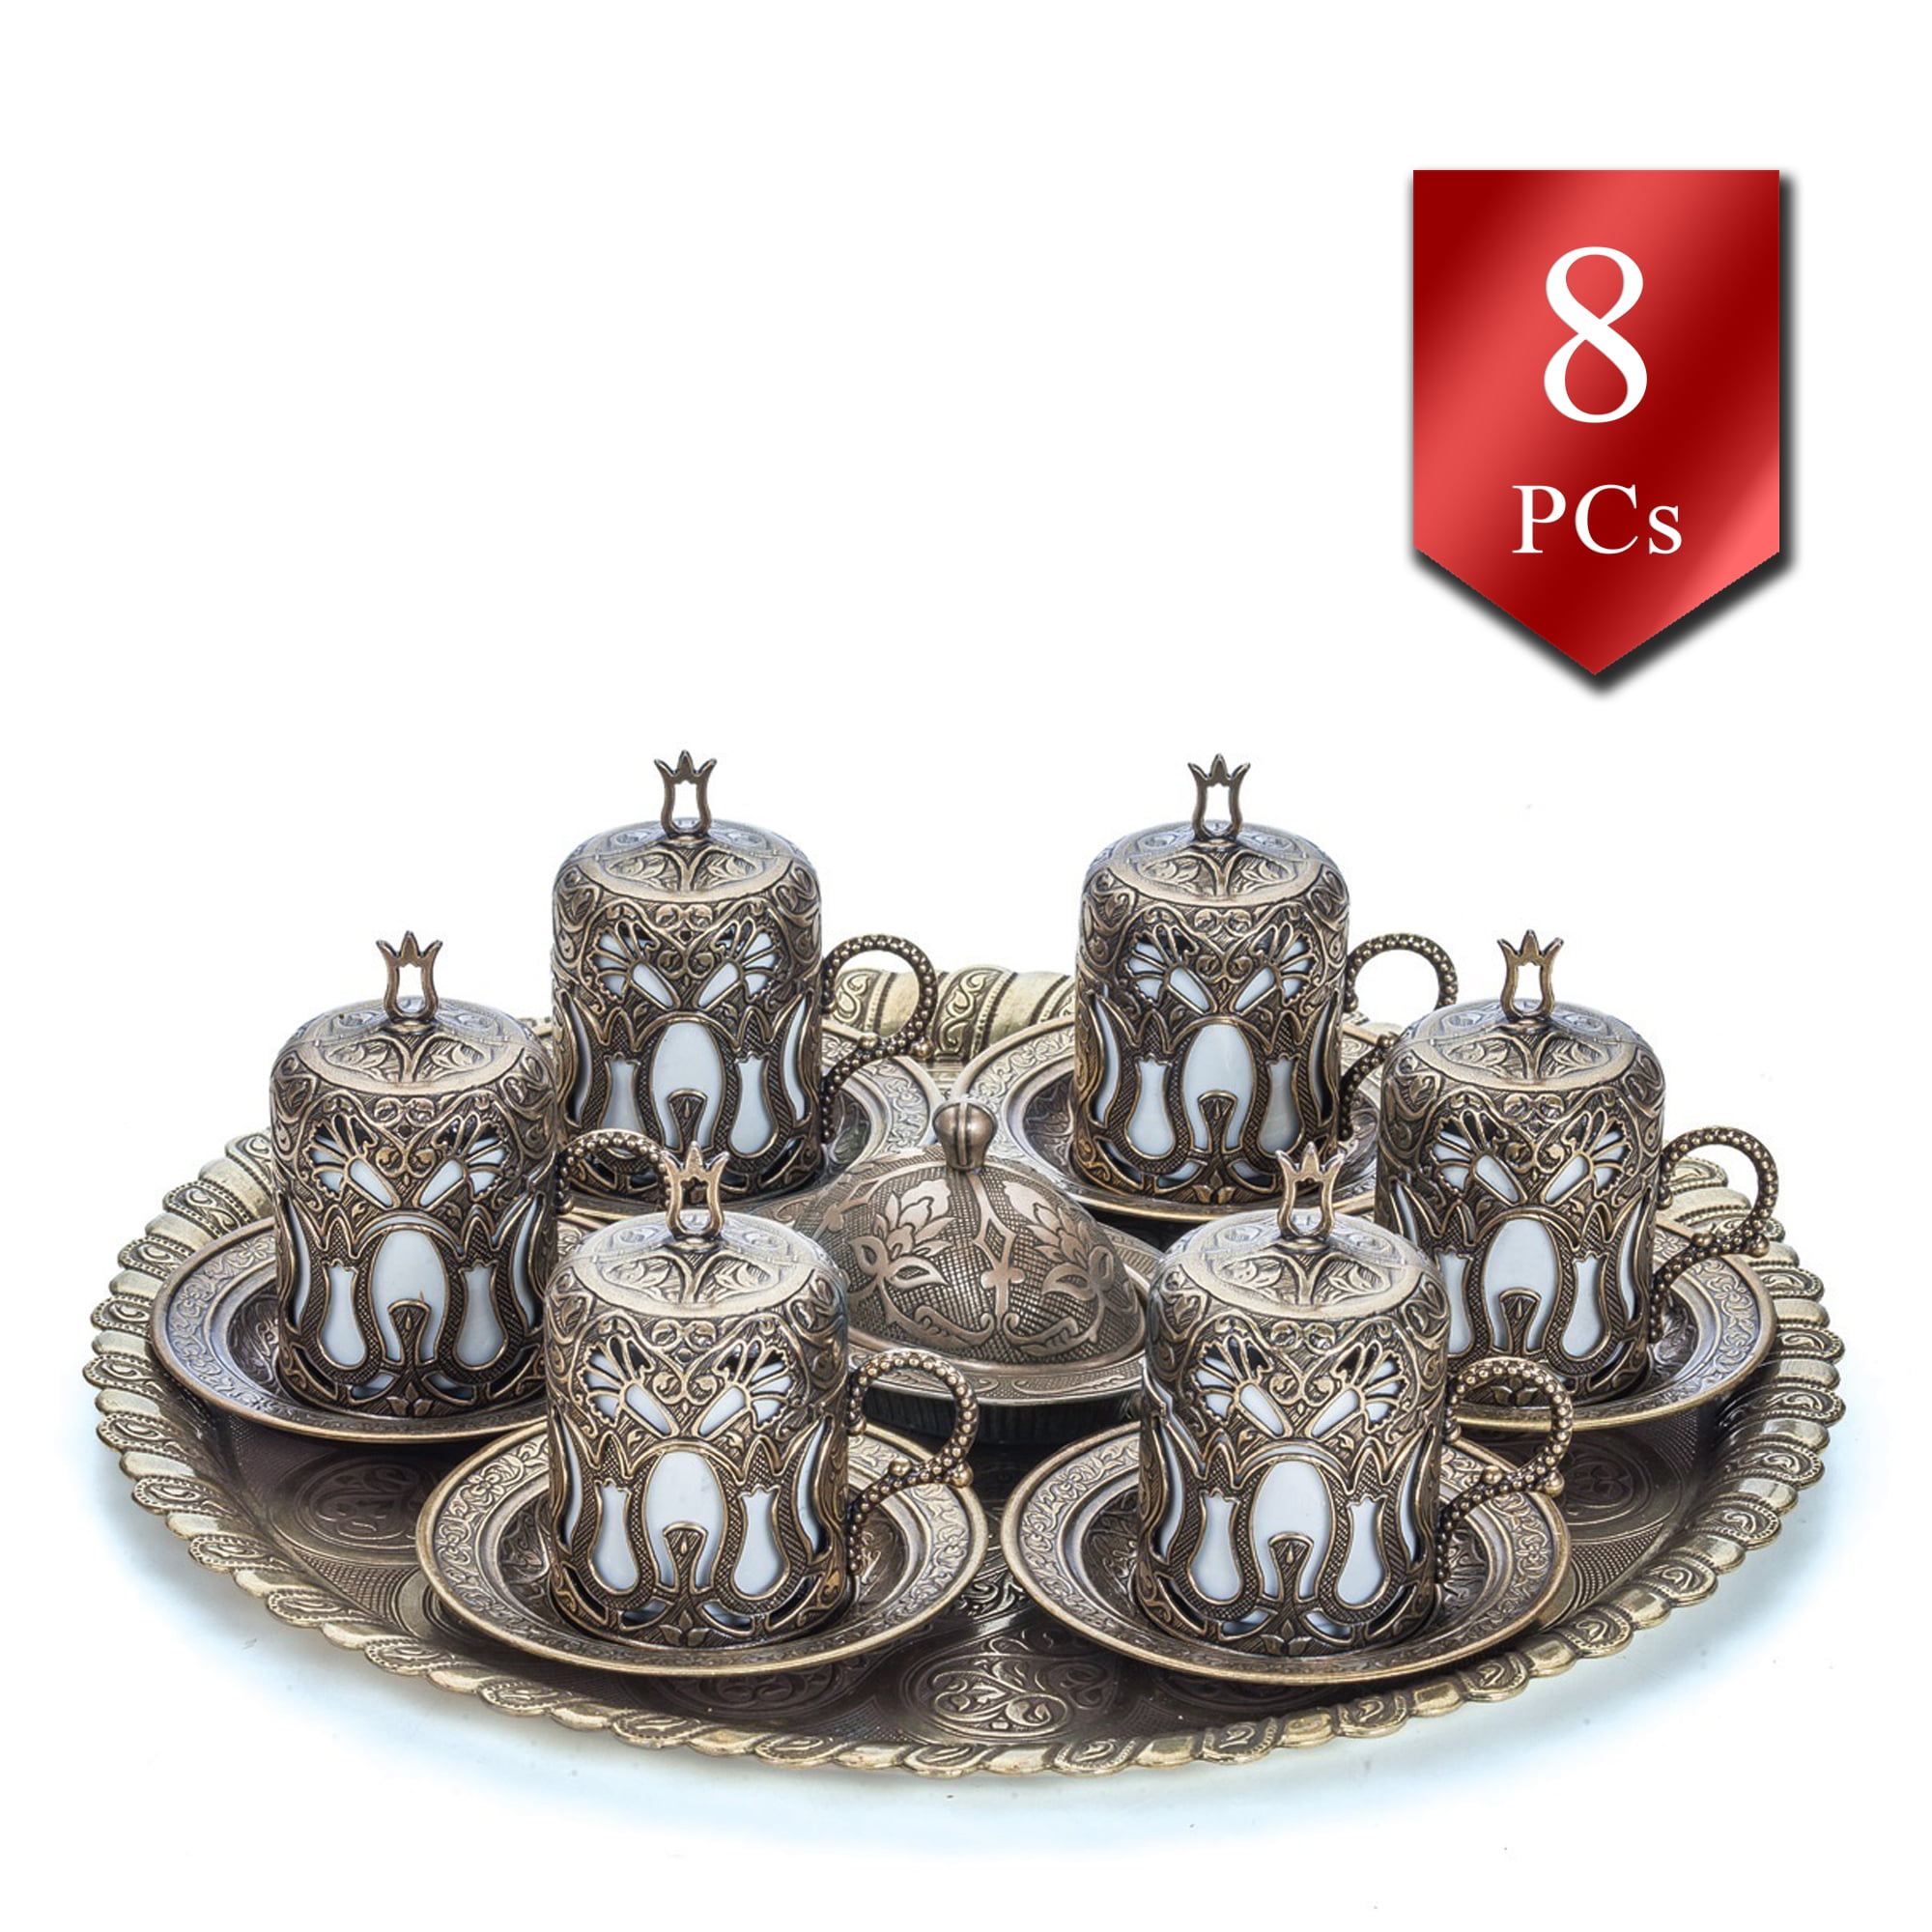 BCS Amazing 9 Pieces Turkish Greek Arabic Coffee & Espresso Set Silver Color Cups and Coffee Pot in Authentic Claret Red Velvet Box Includes Turkish Coffee 